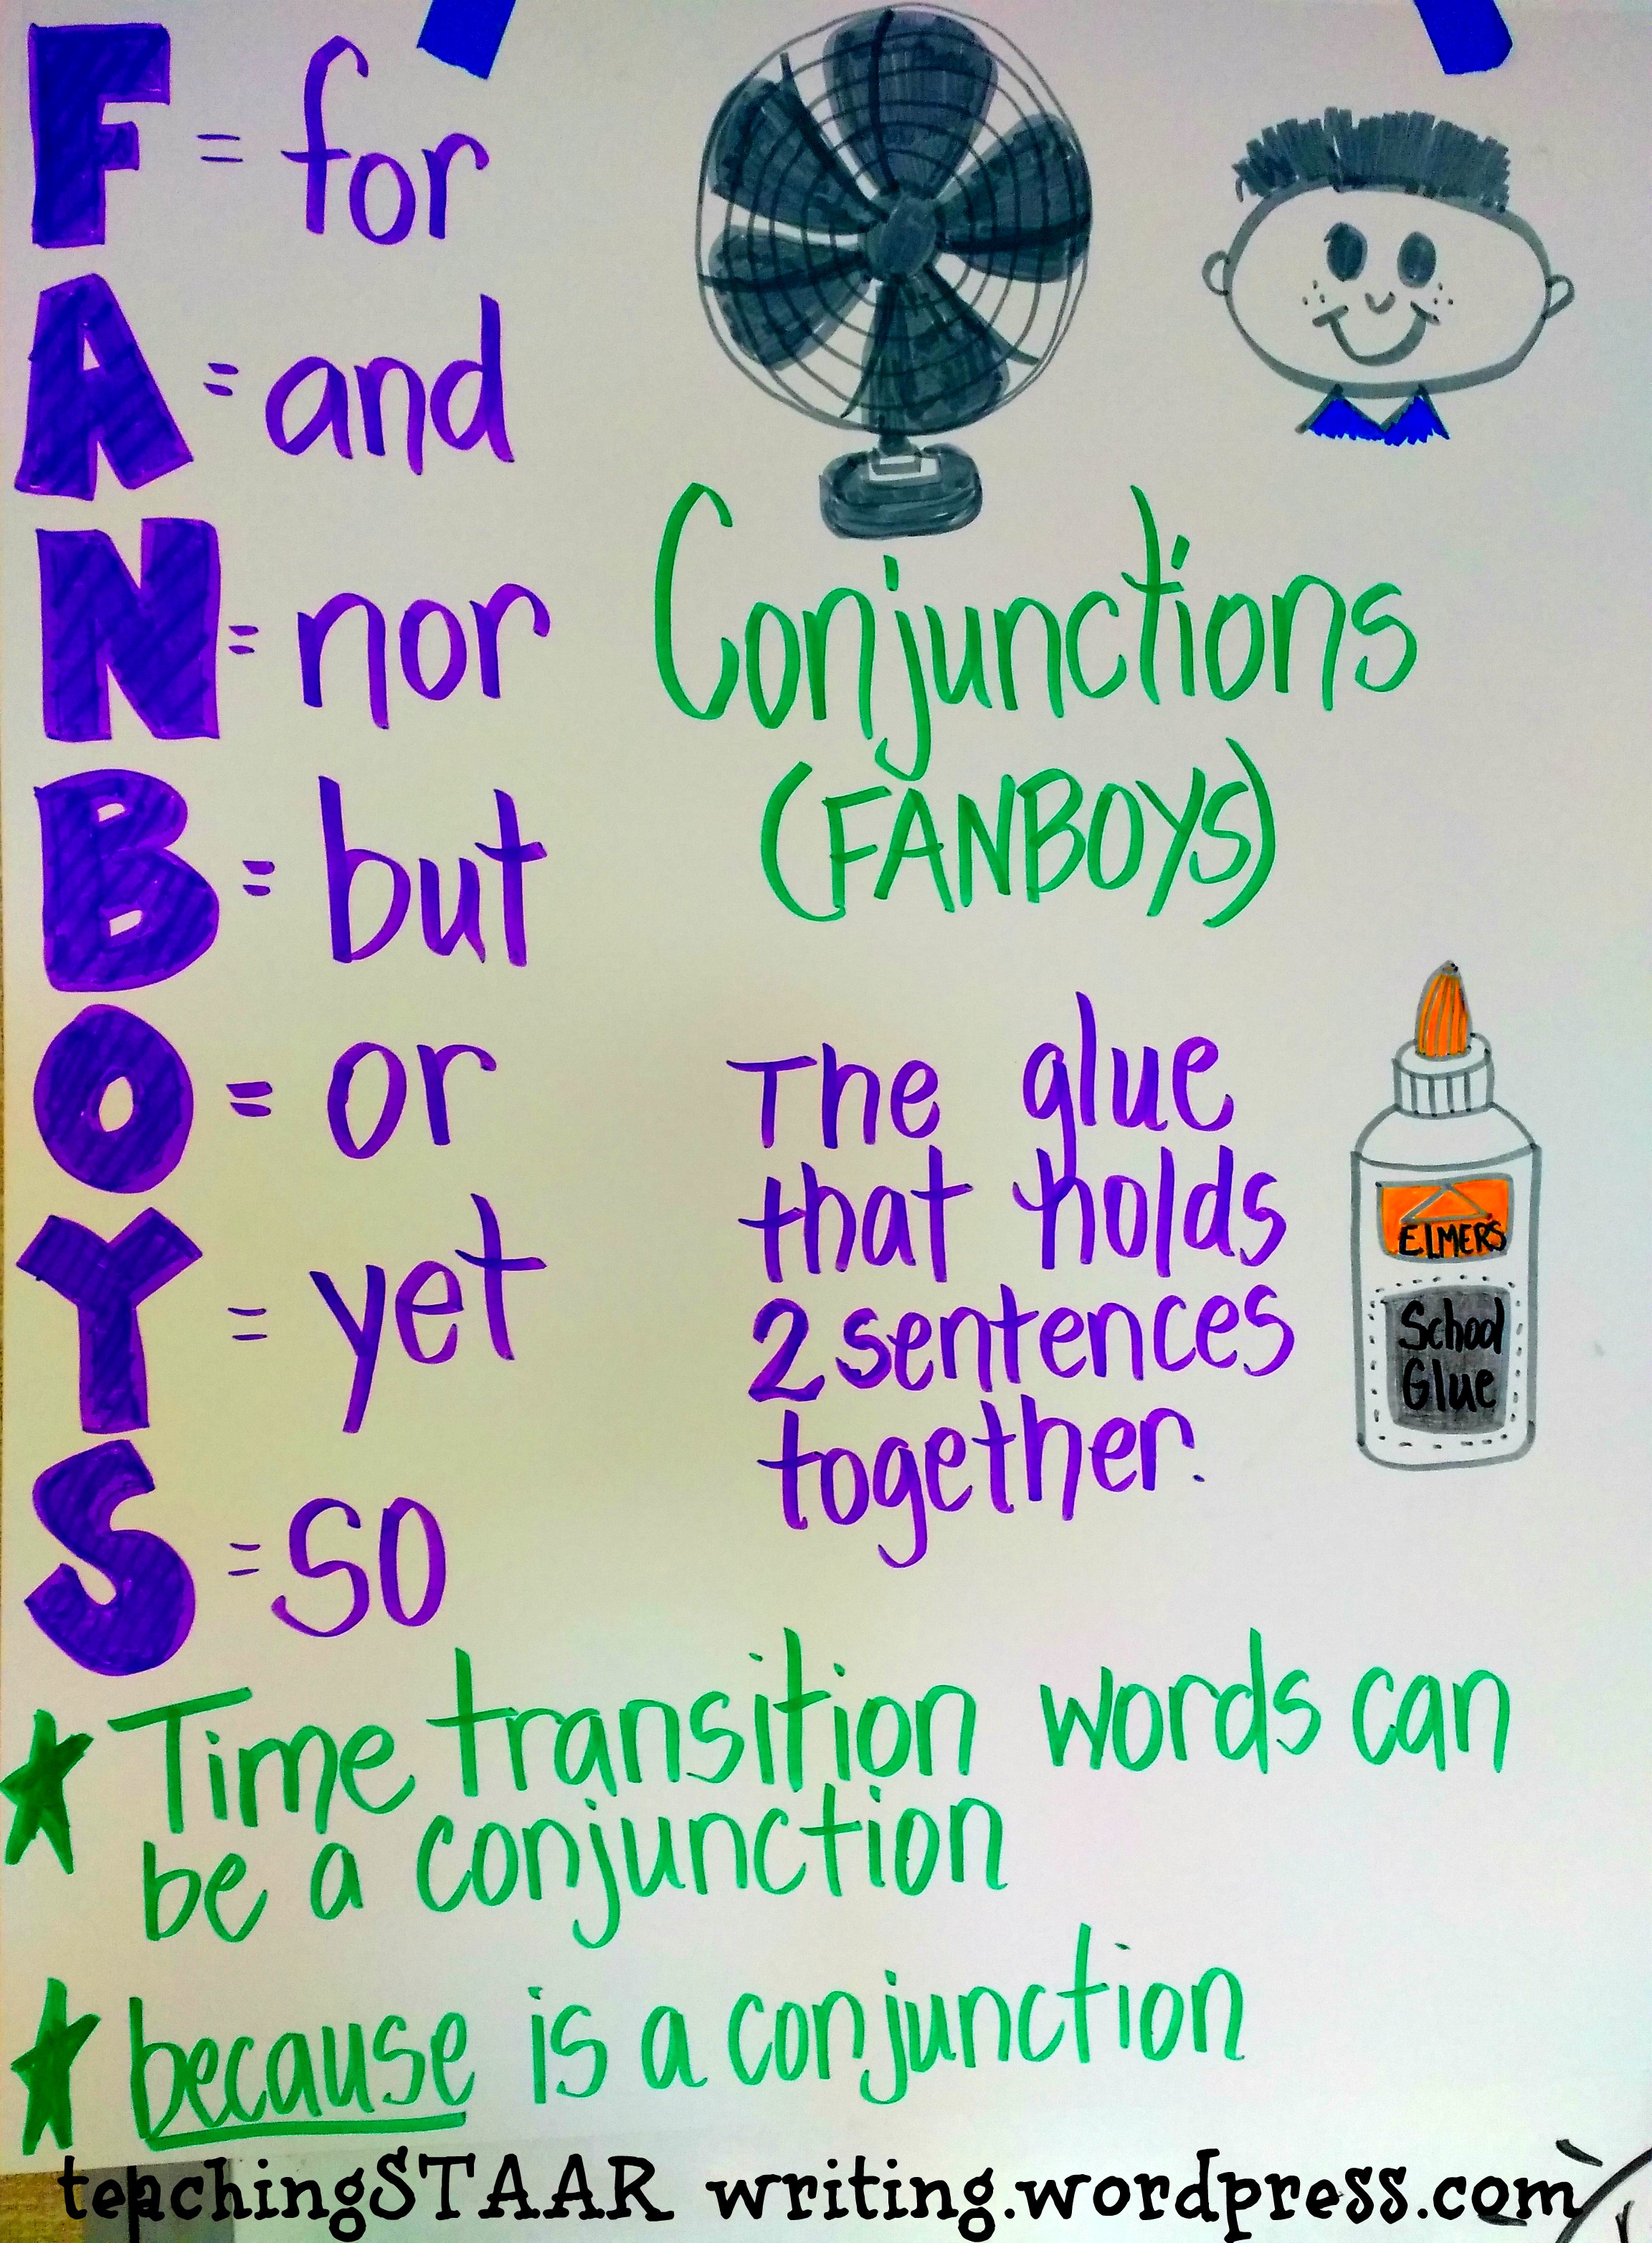 Revise And Edit Anchor Chart